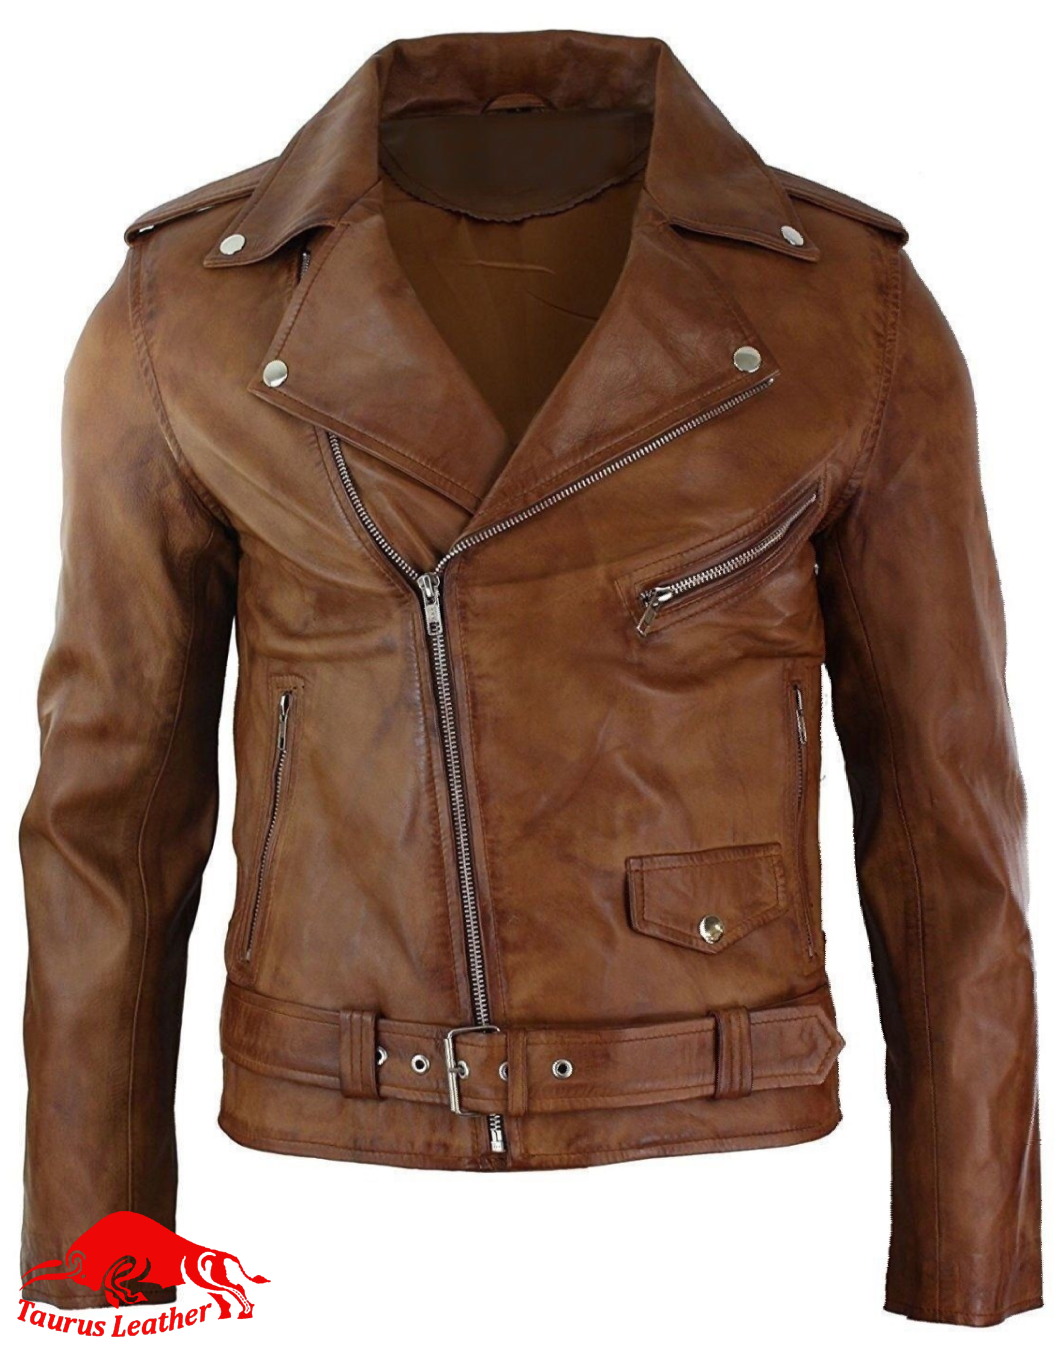 TAURUS LEATHER Tank Color Cow Leather Jacket Wax Article